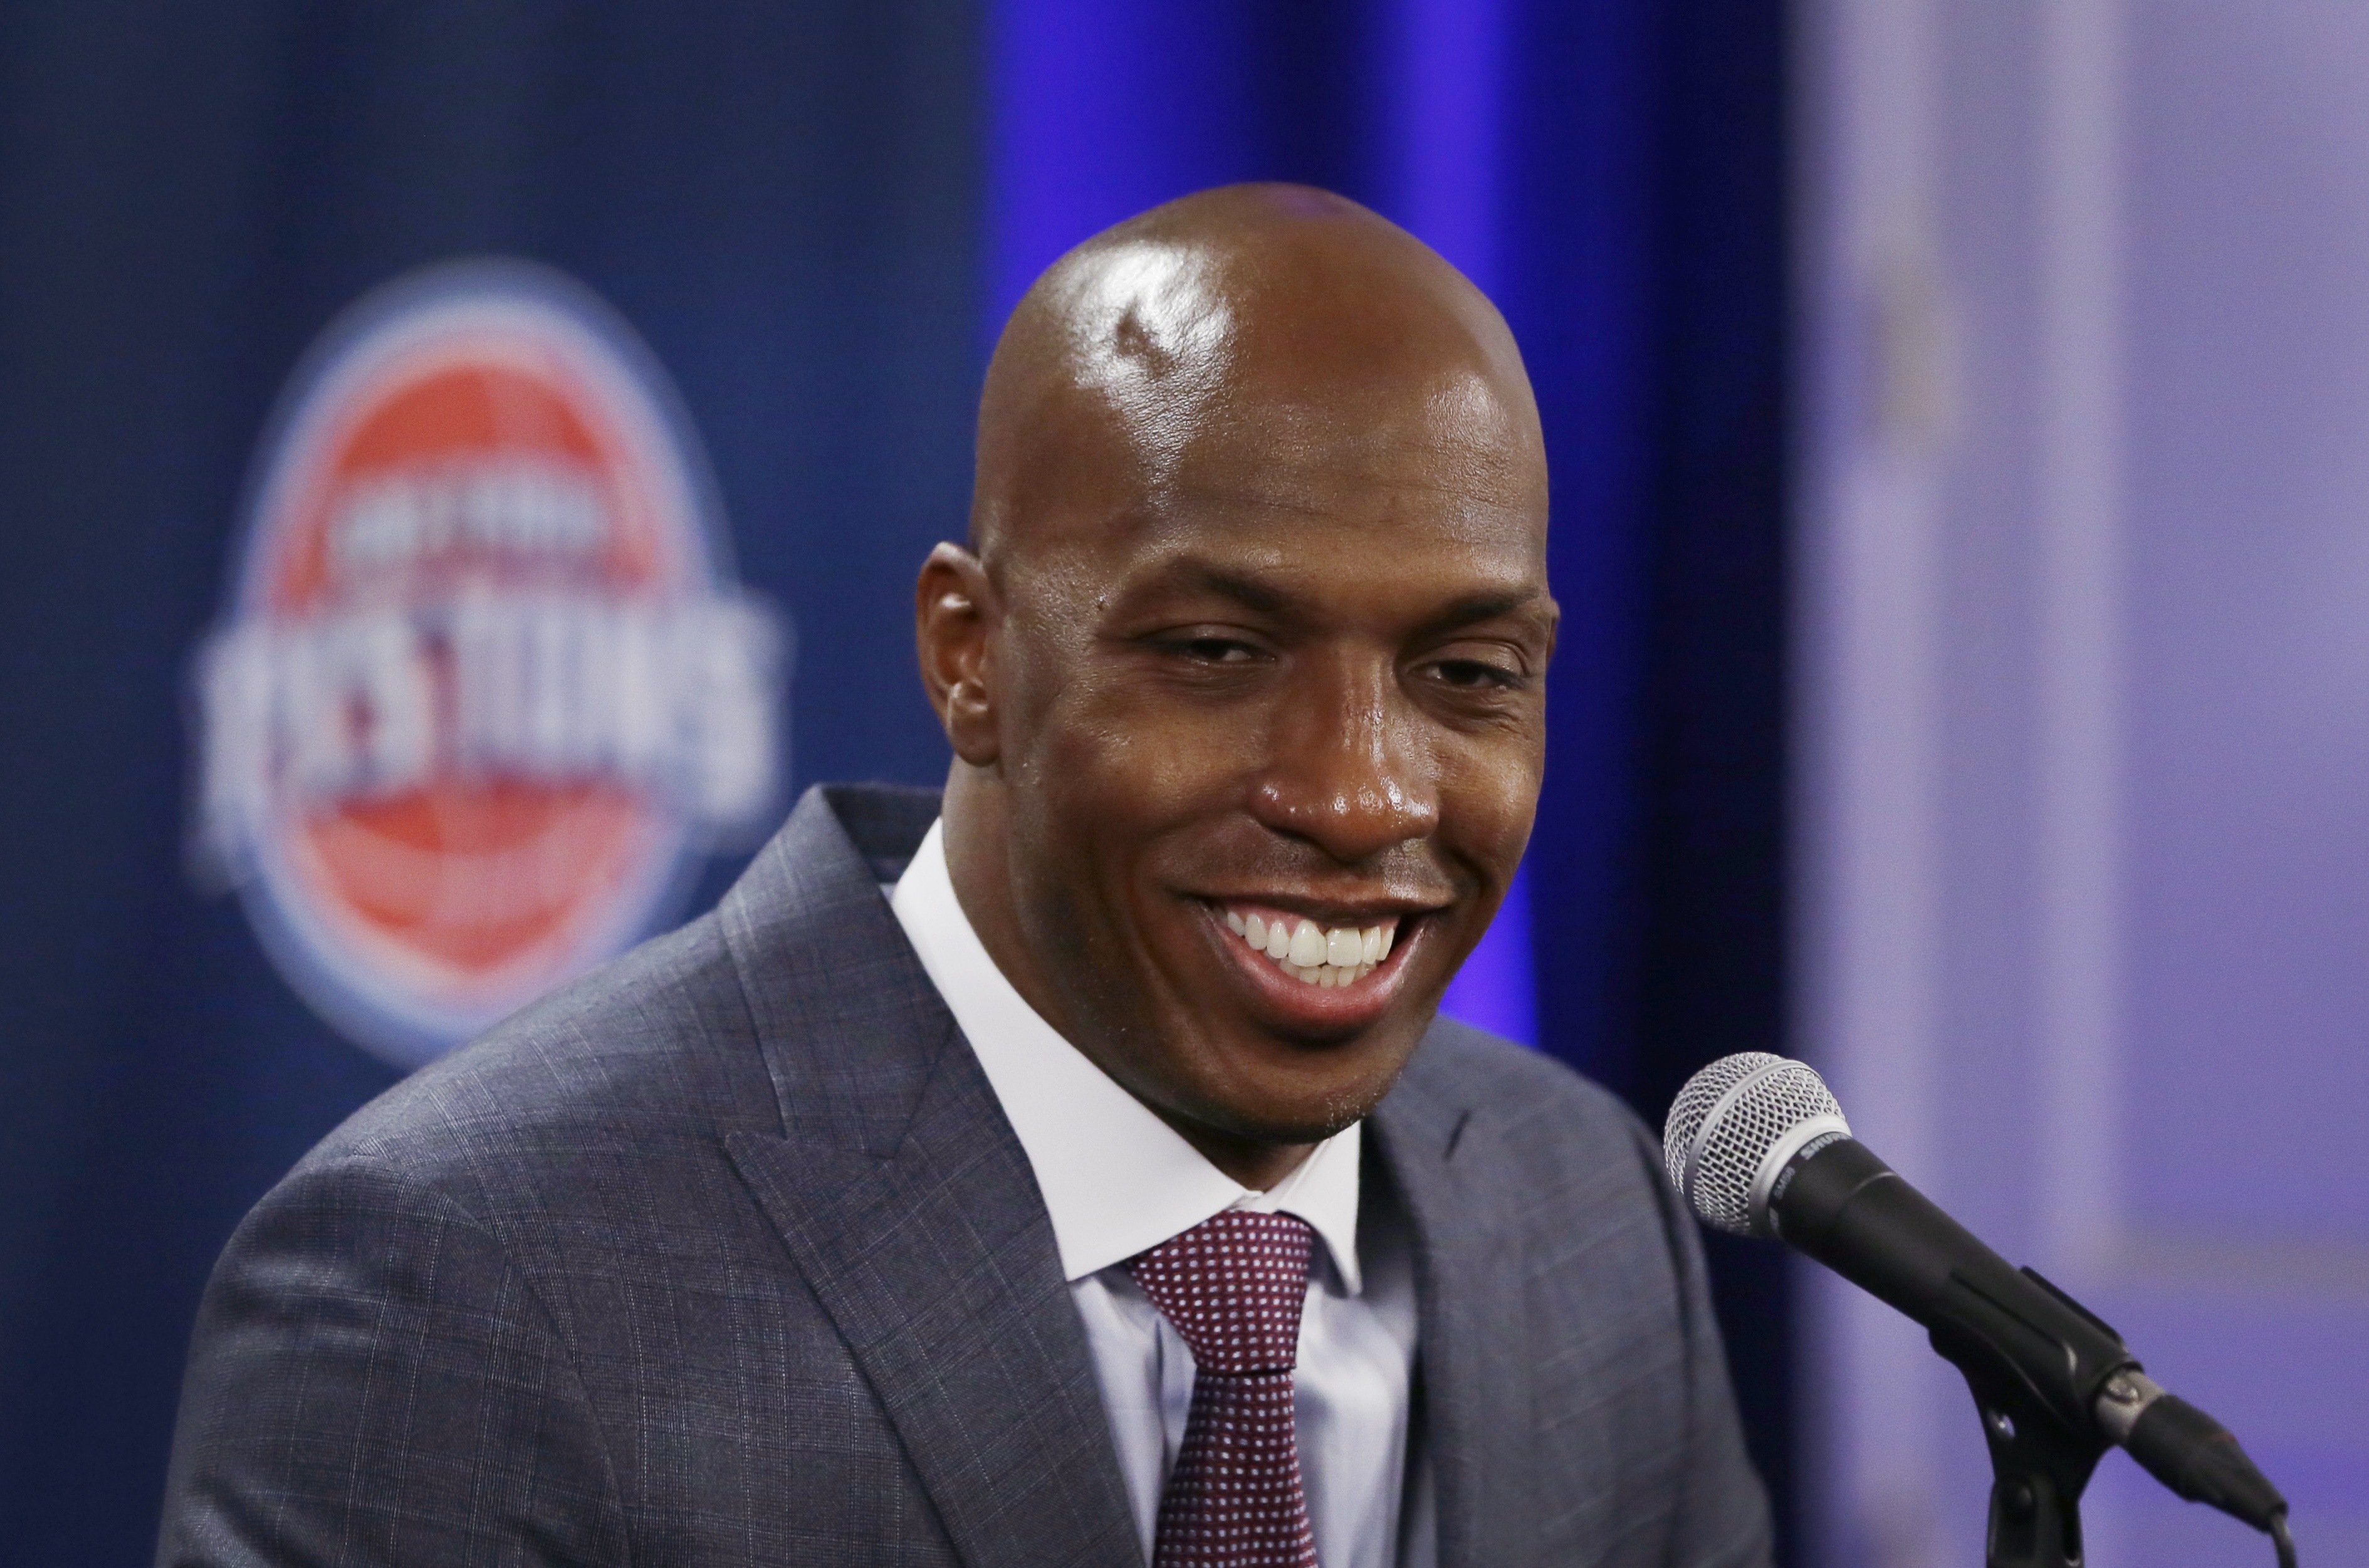 Chauncey Billups Is Getting High Praise And The Celtics Need To Hustle If They Want Him As Head Coach The Boston Globe